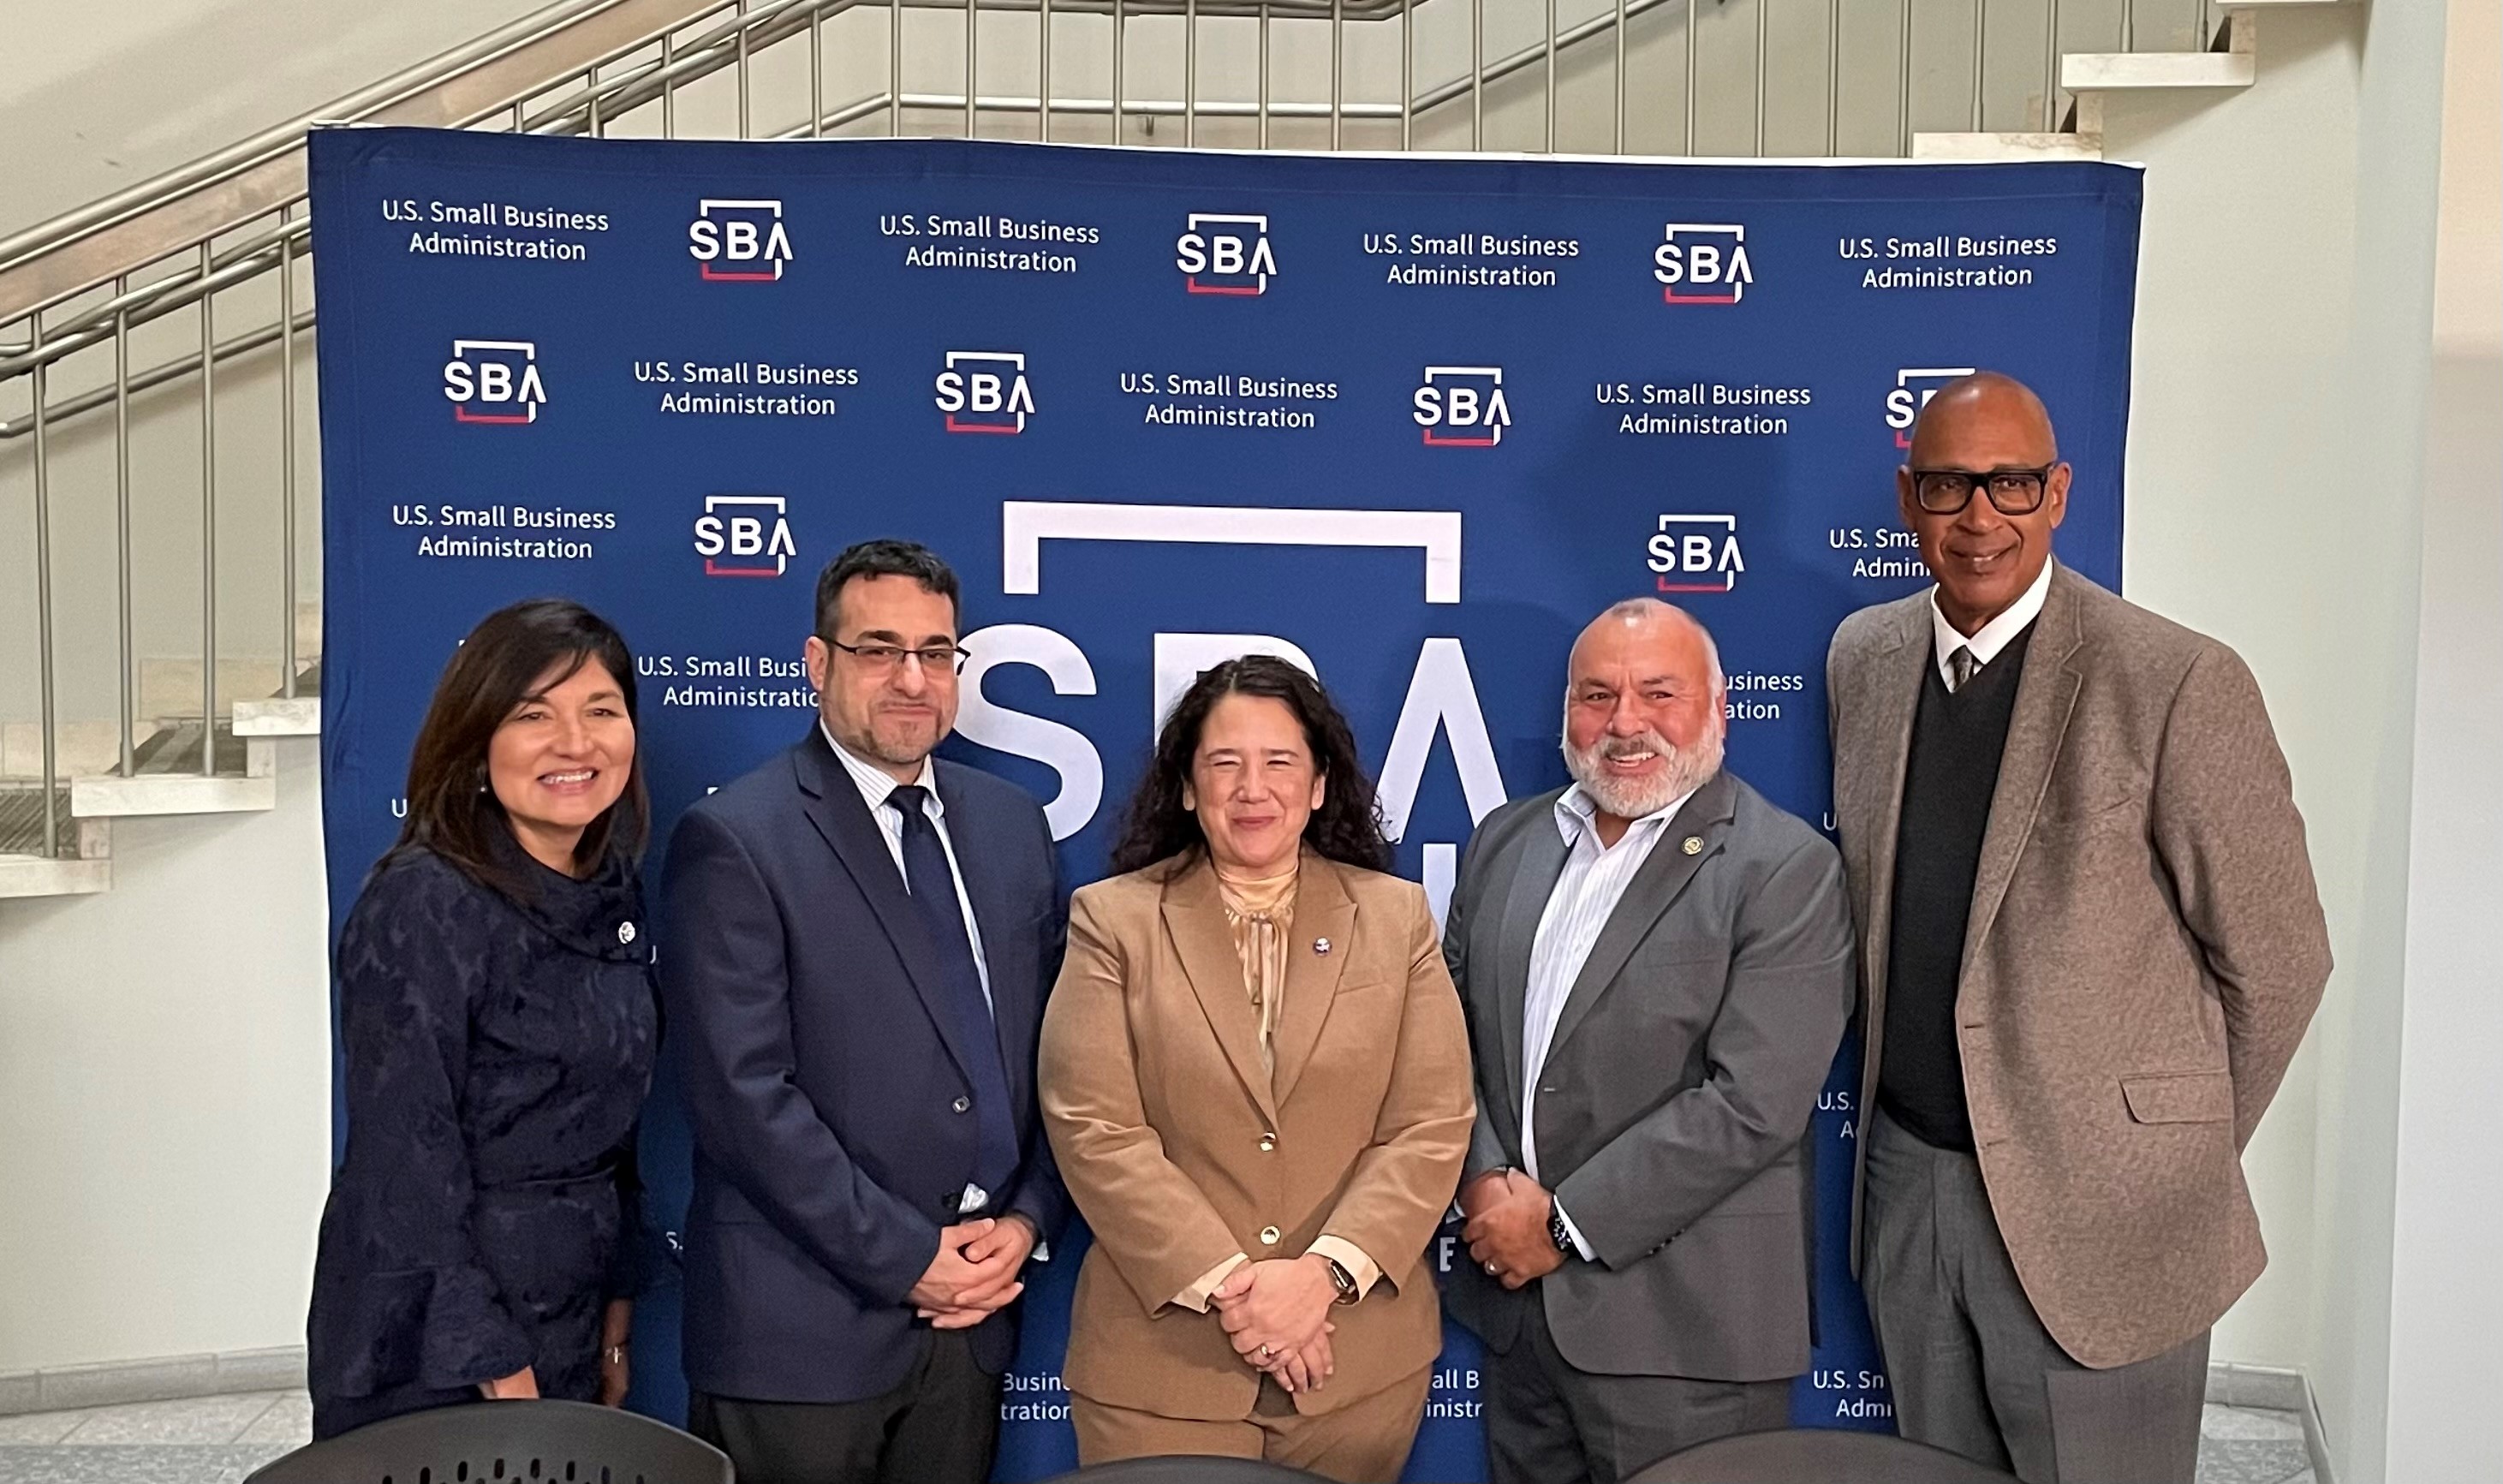  Assemblymember Rodriguez Congratulates the U.S.R.C. and the U.S. Small Business Administration on their Partnership for Seismic Resiliency